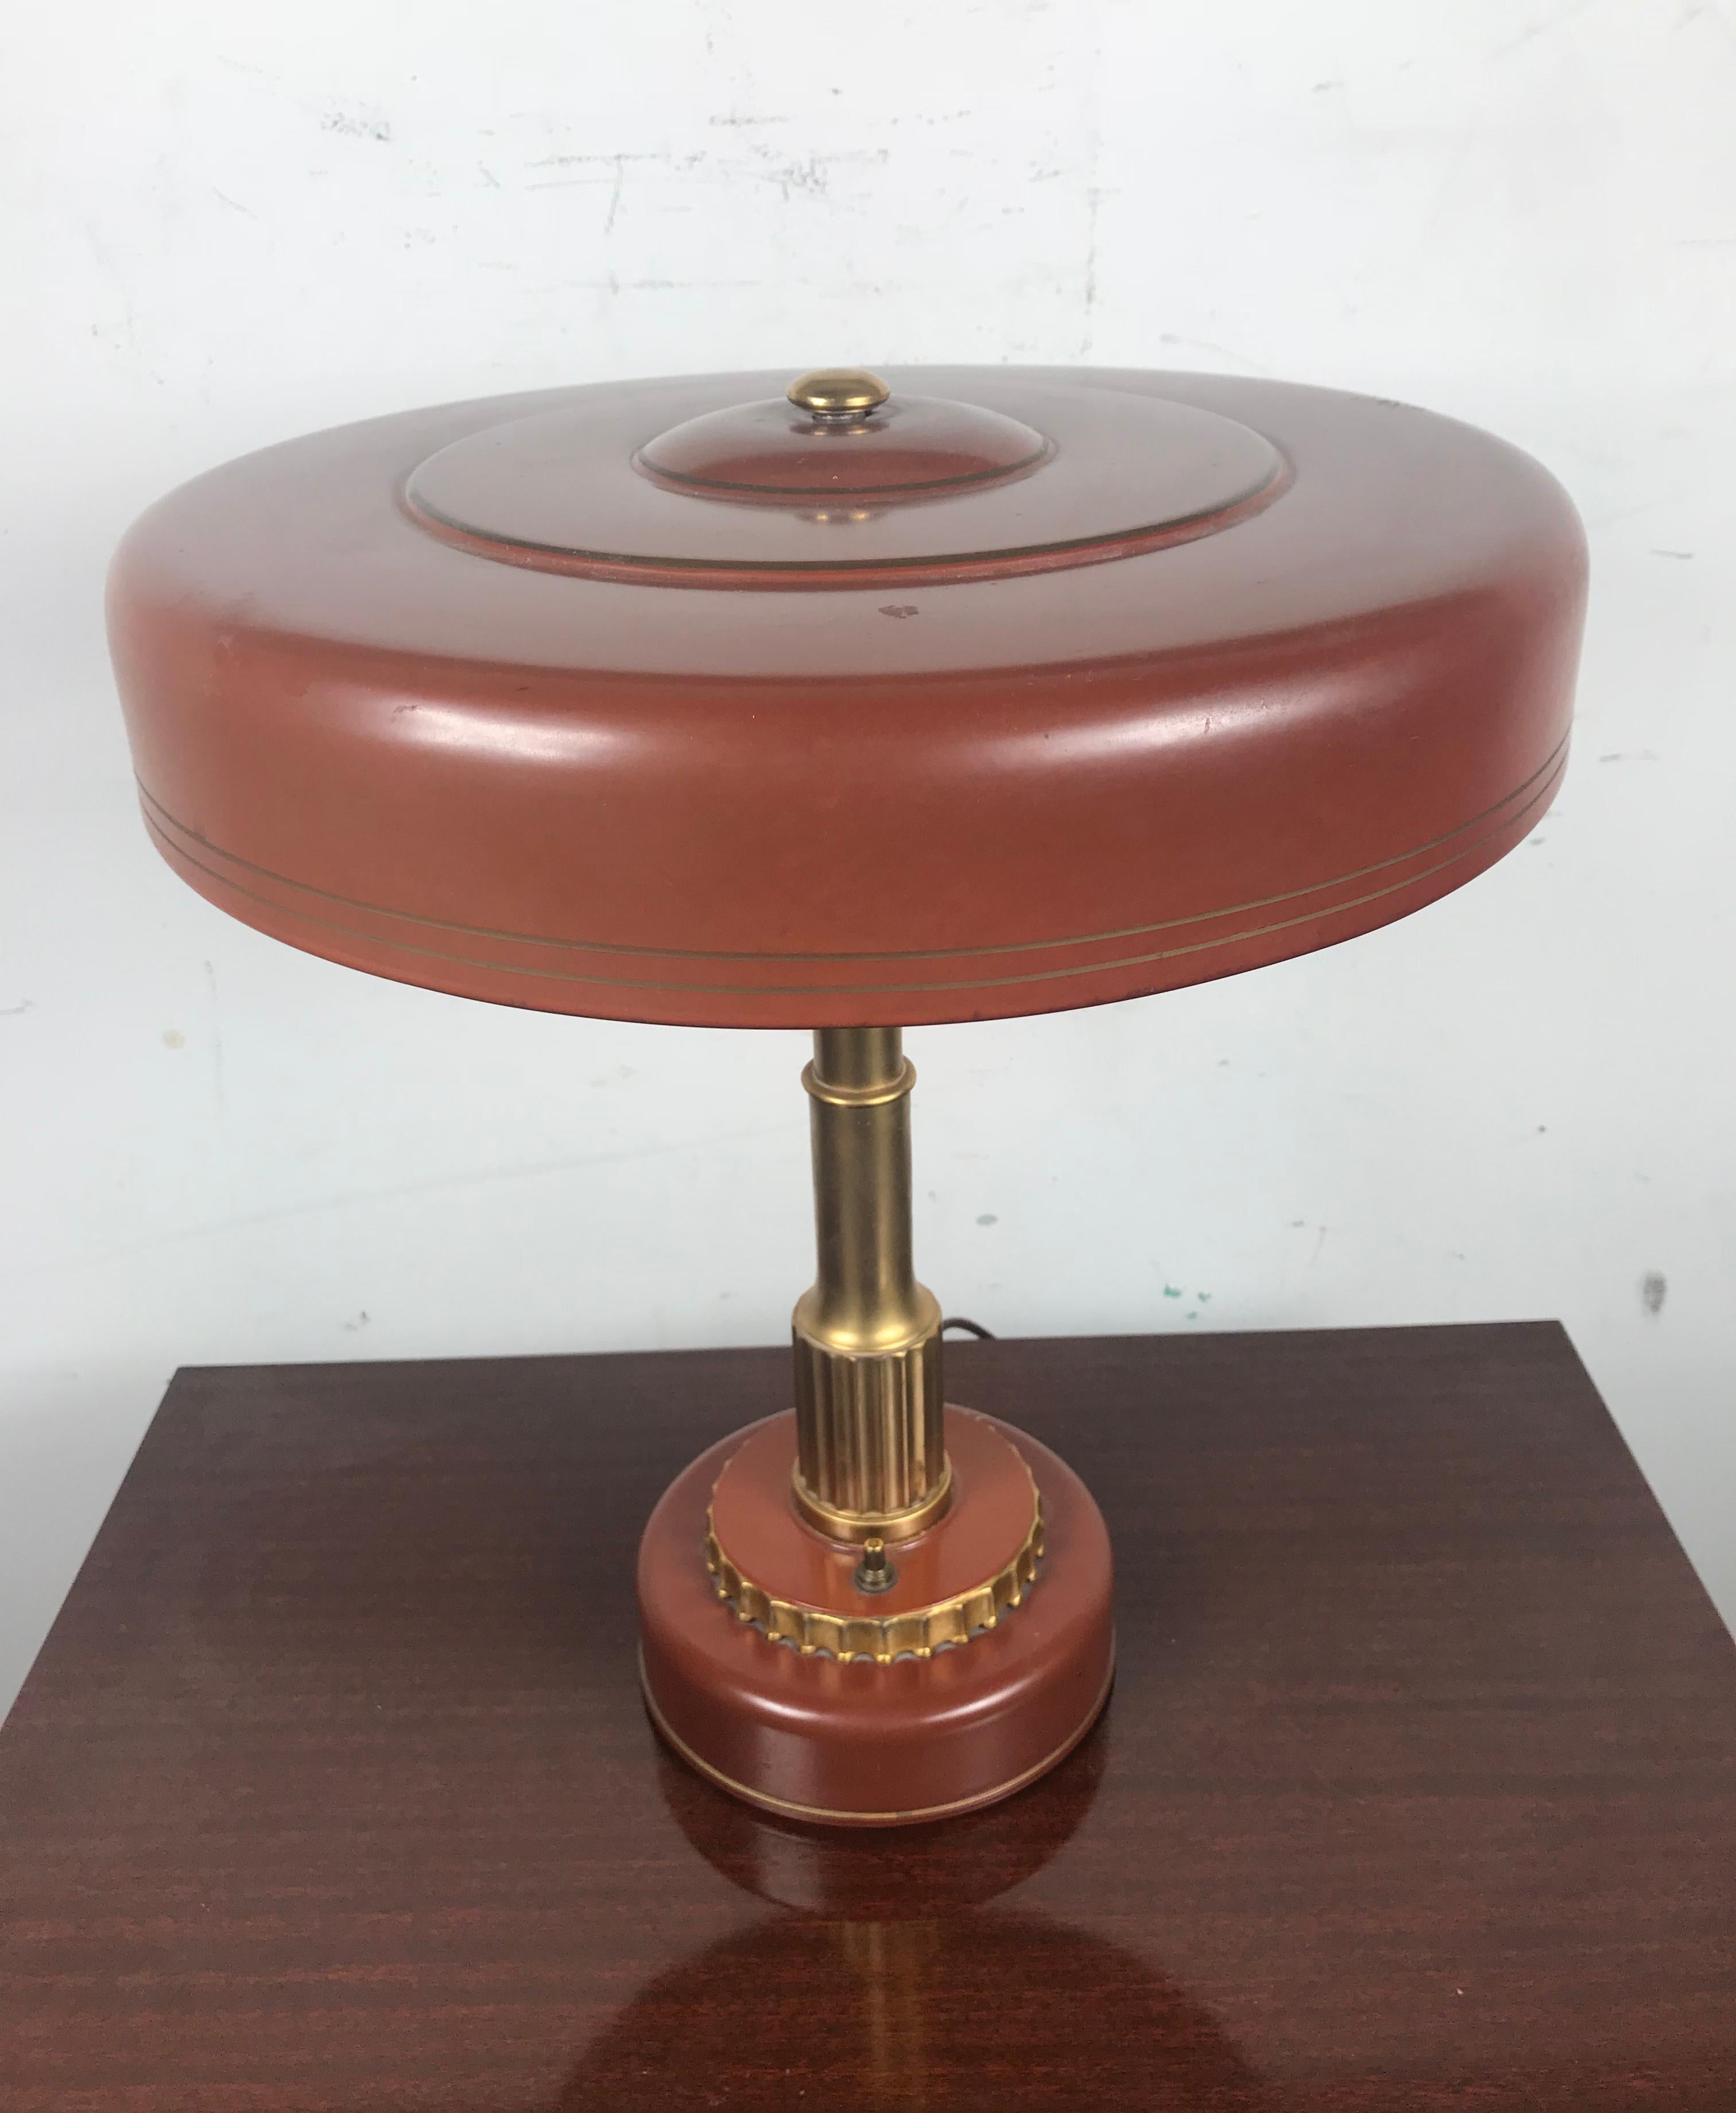 Art Deco Machine age table or desk lamp attributed to Gilbert Rohde for Mutual Sunset Lamp Co., circa 1930s, wonderful original finish, painted metal and brass, push on /off button with florescent lighting. Tested and all electrical working.